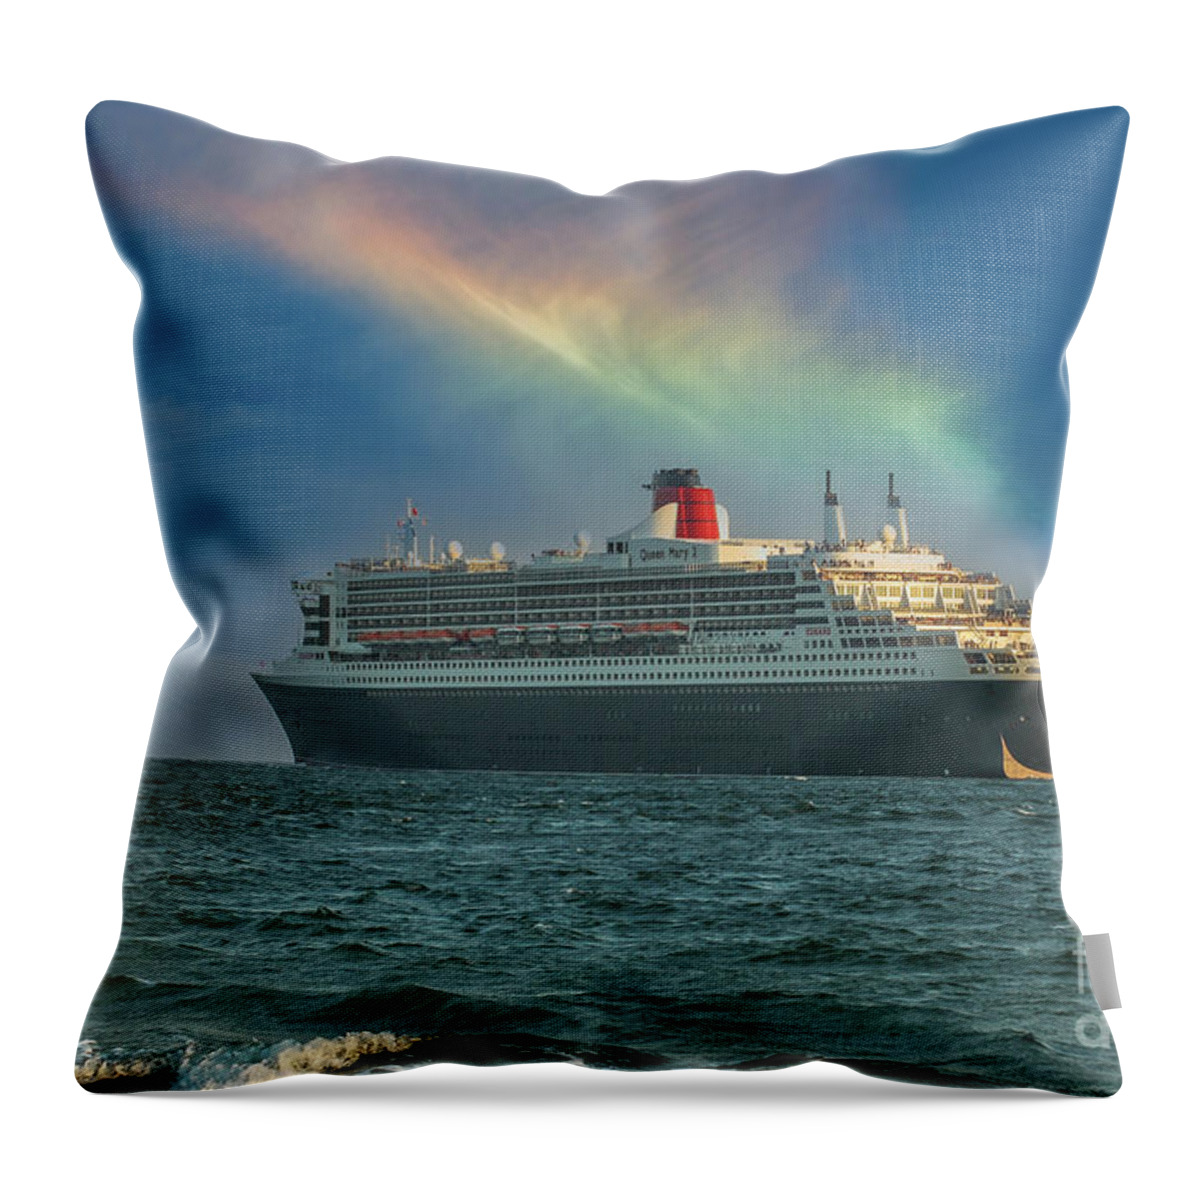 Queen Mary Ii Throw Pillow featuring the photograph British Transatlantic Ocean Liner Leaving Charleston South Carolina June 7 2006 by Dale Powell